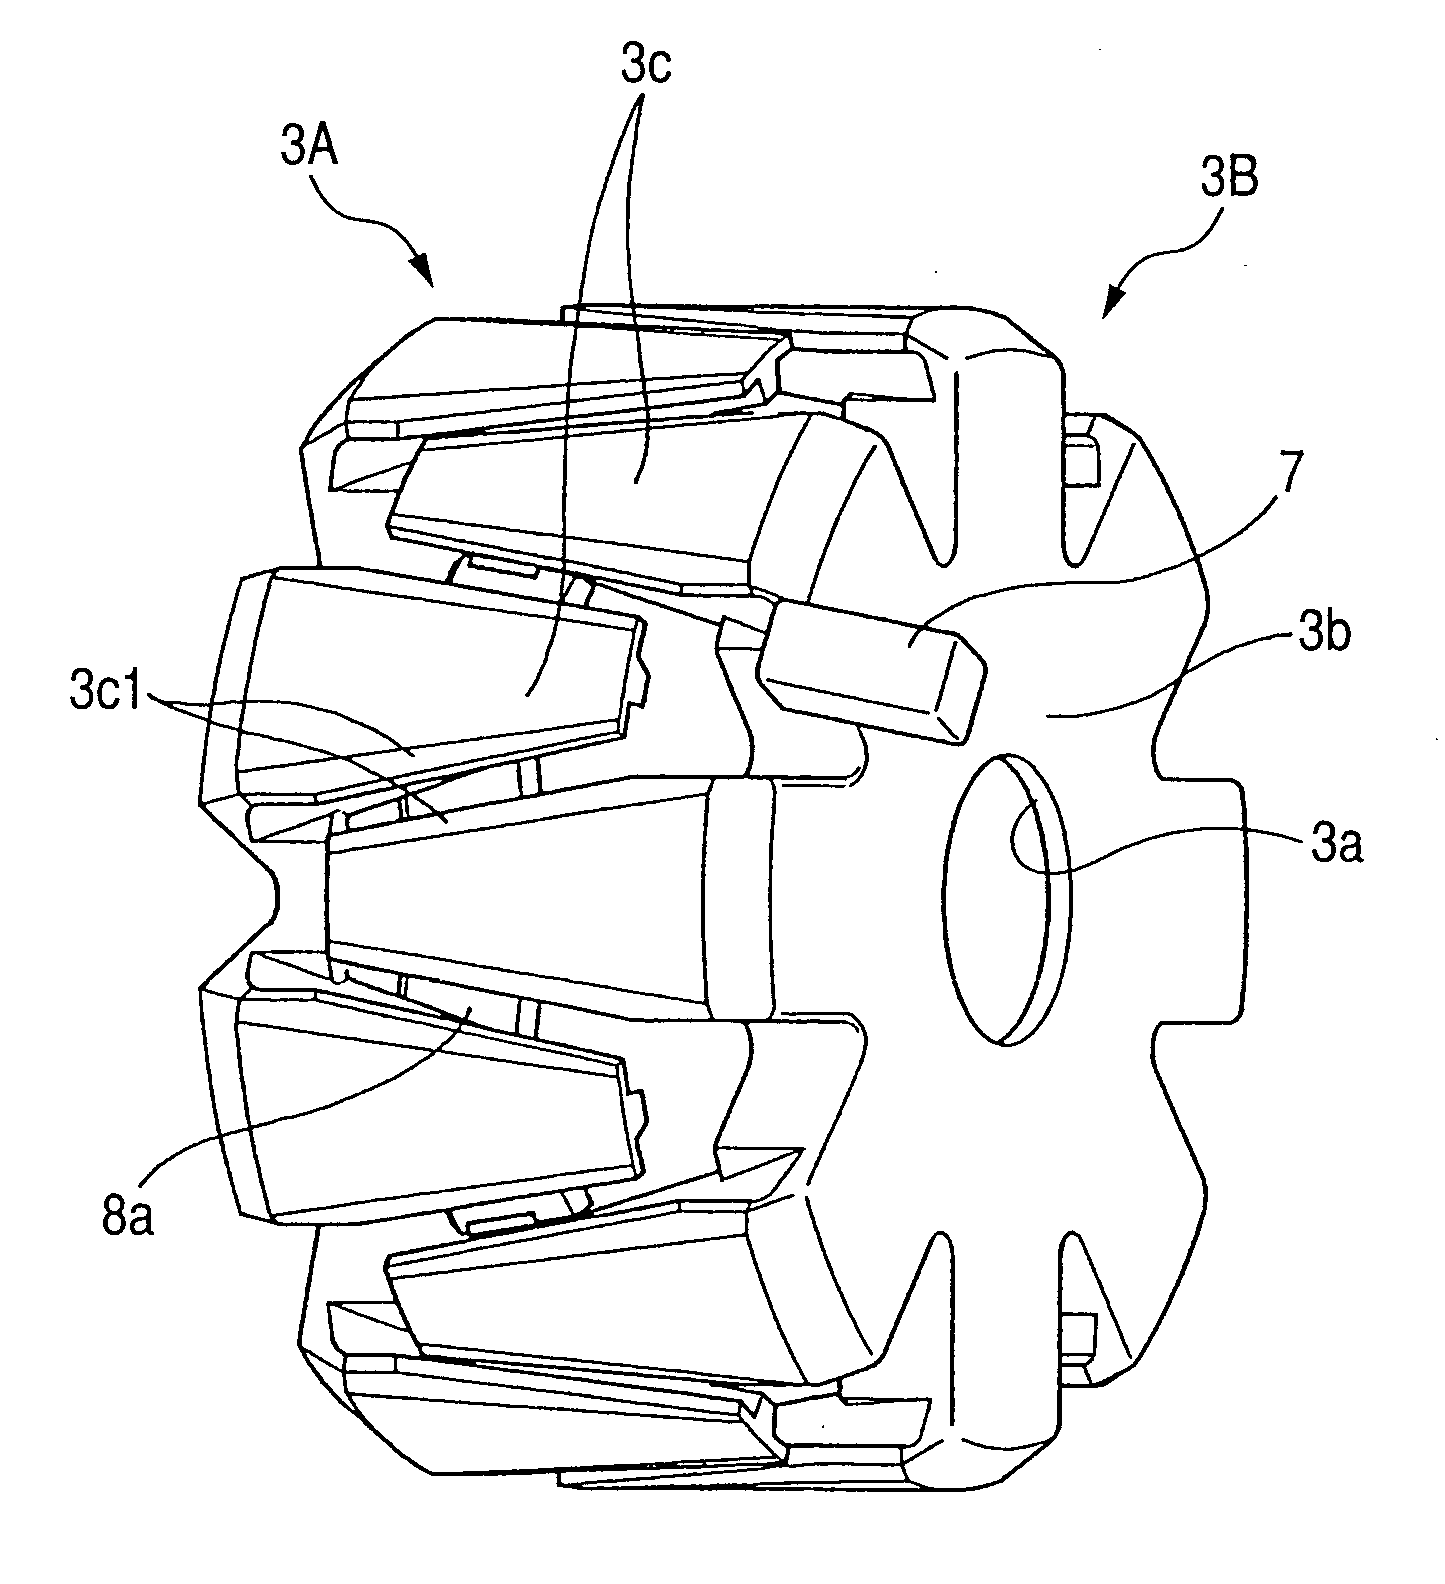 Rotor for electric rotary machine